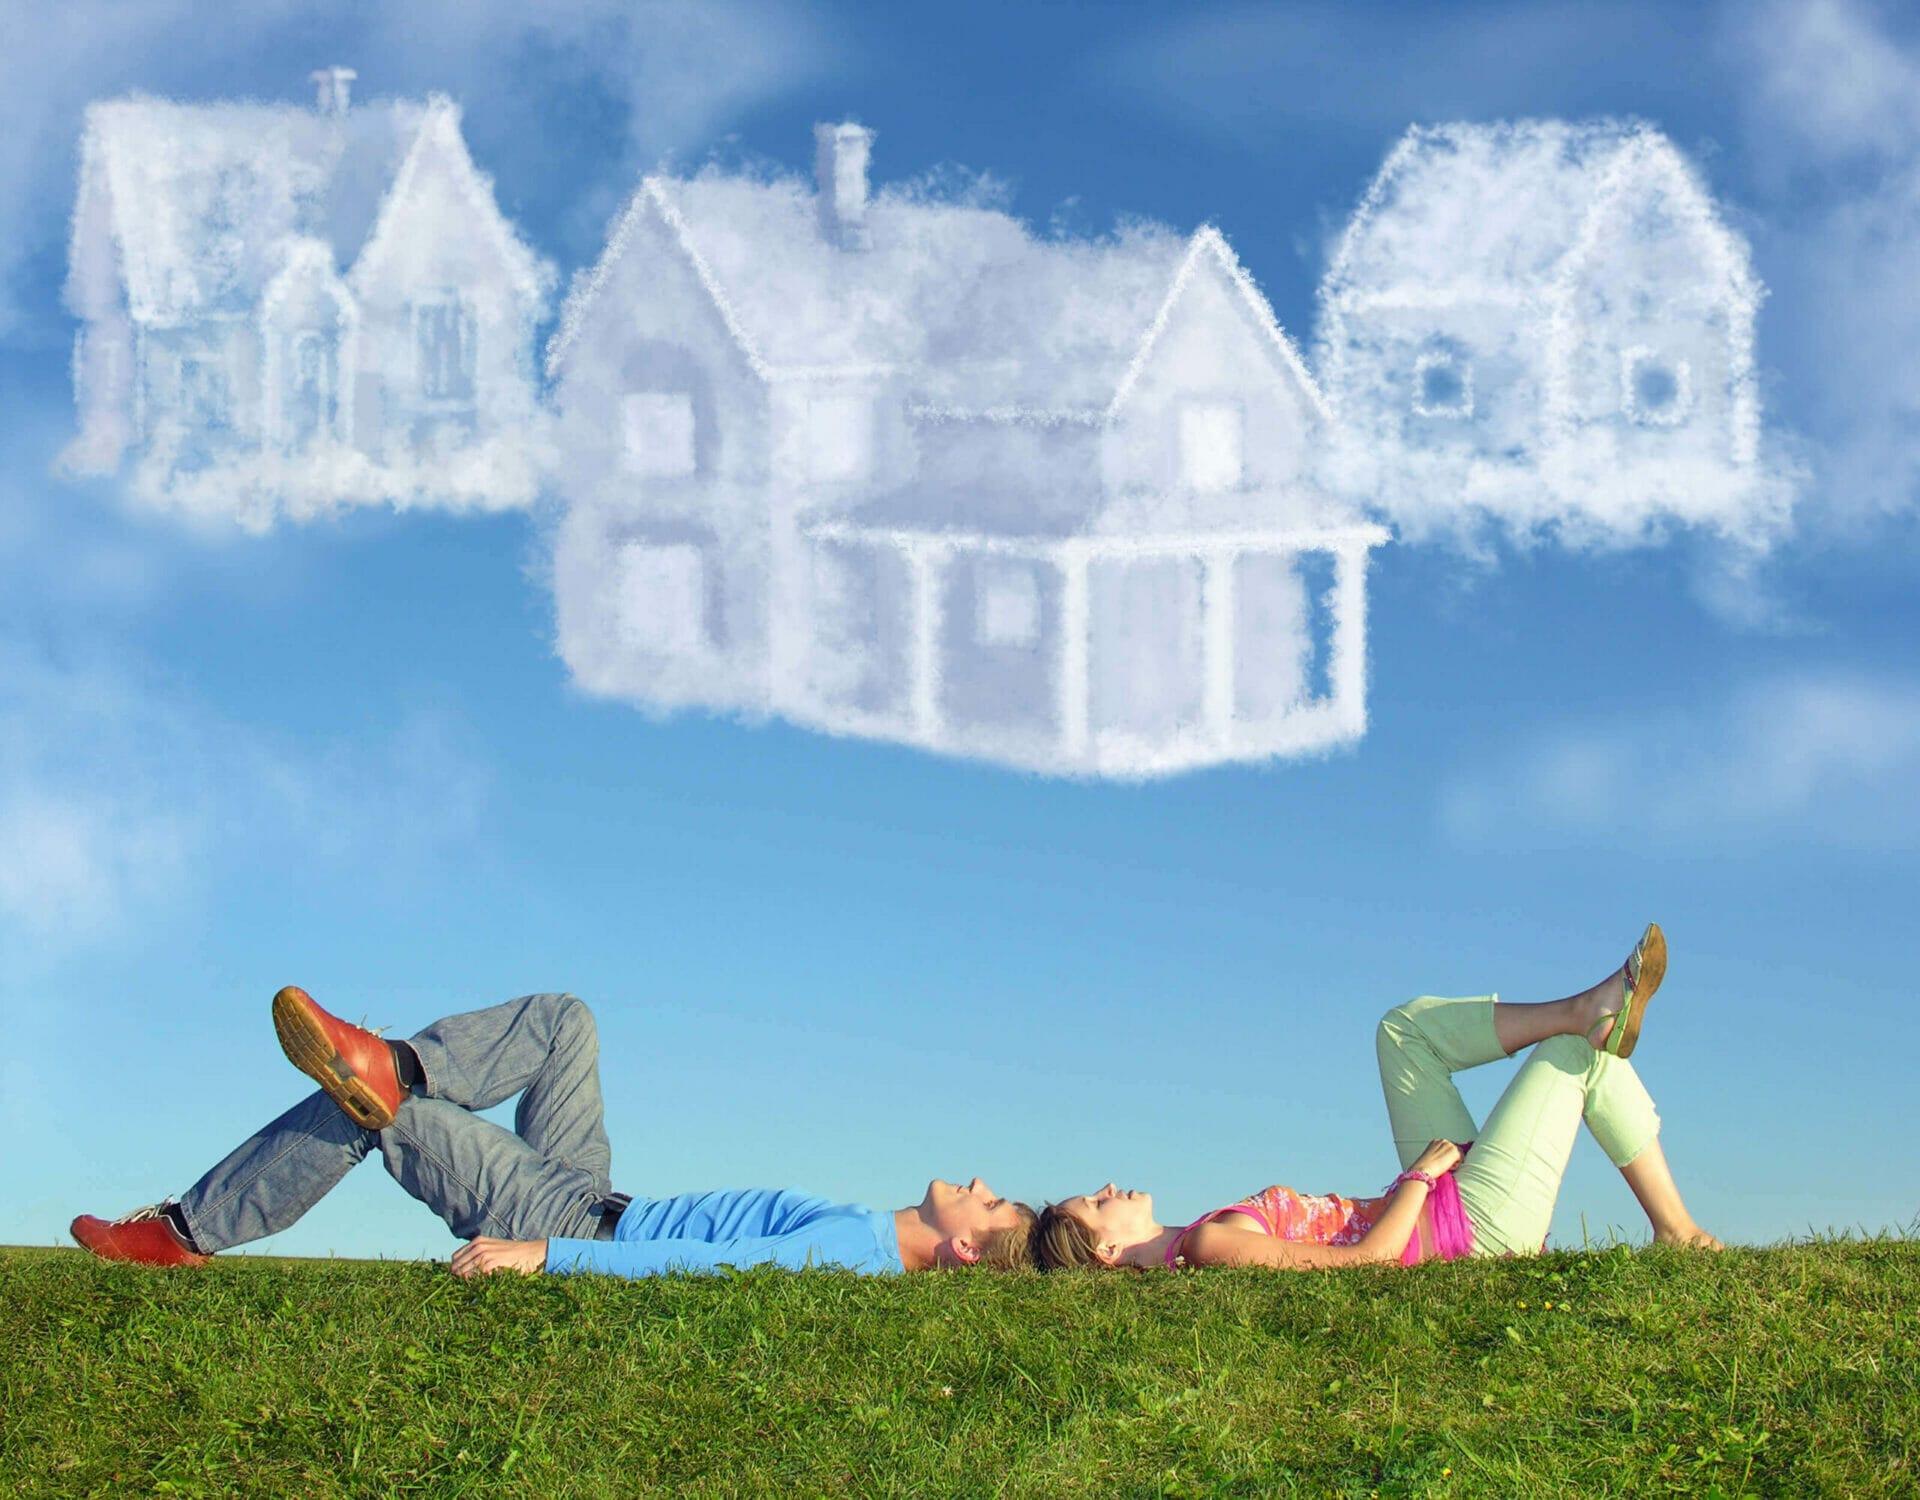 finding your dream home